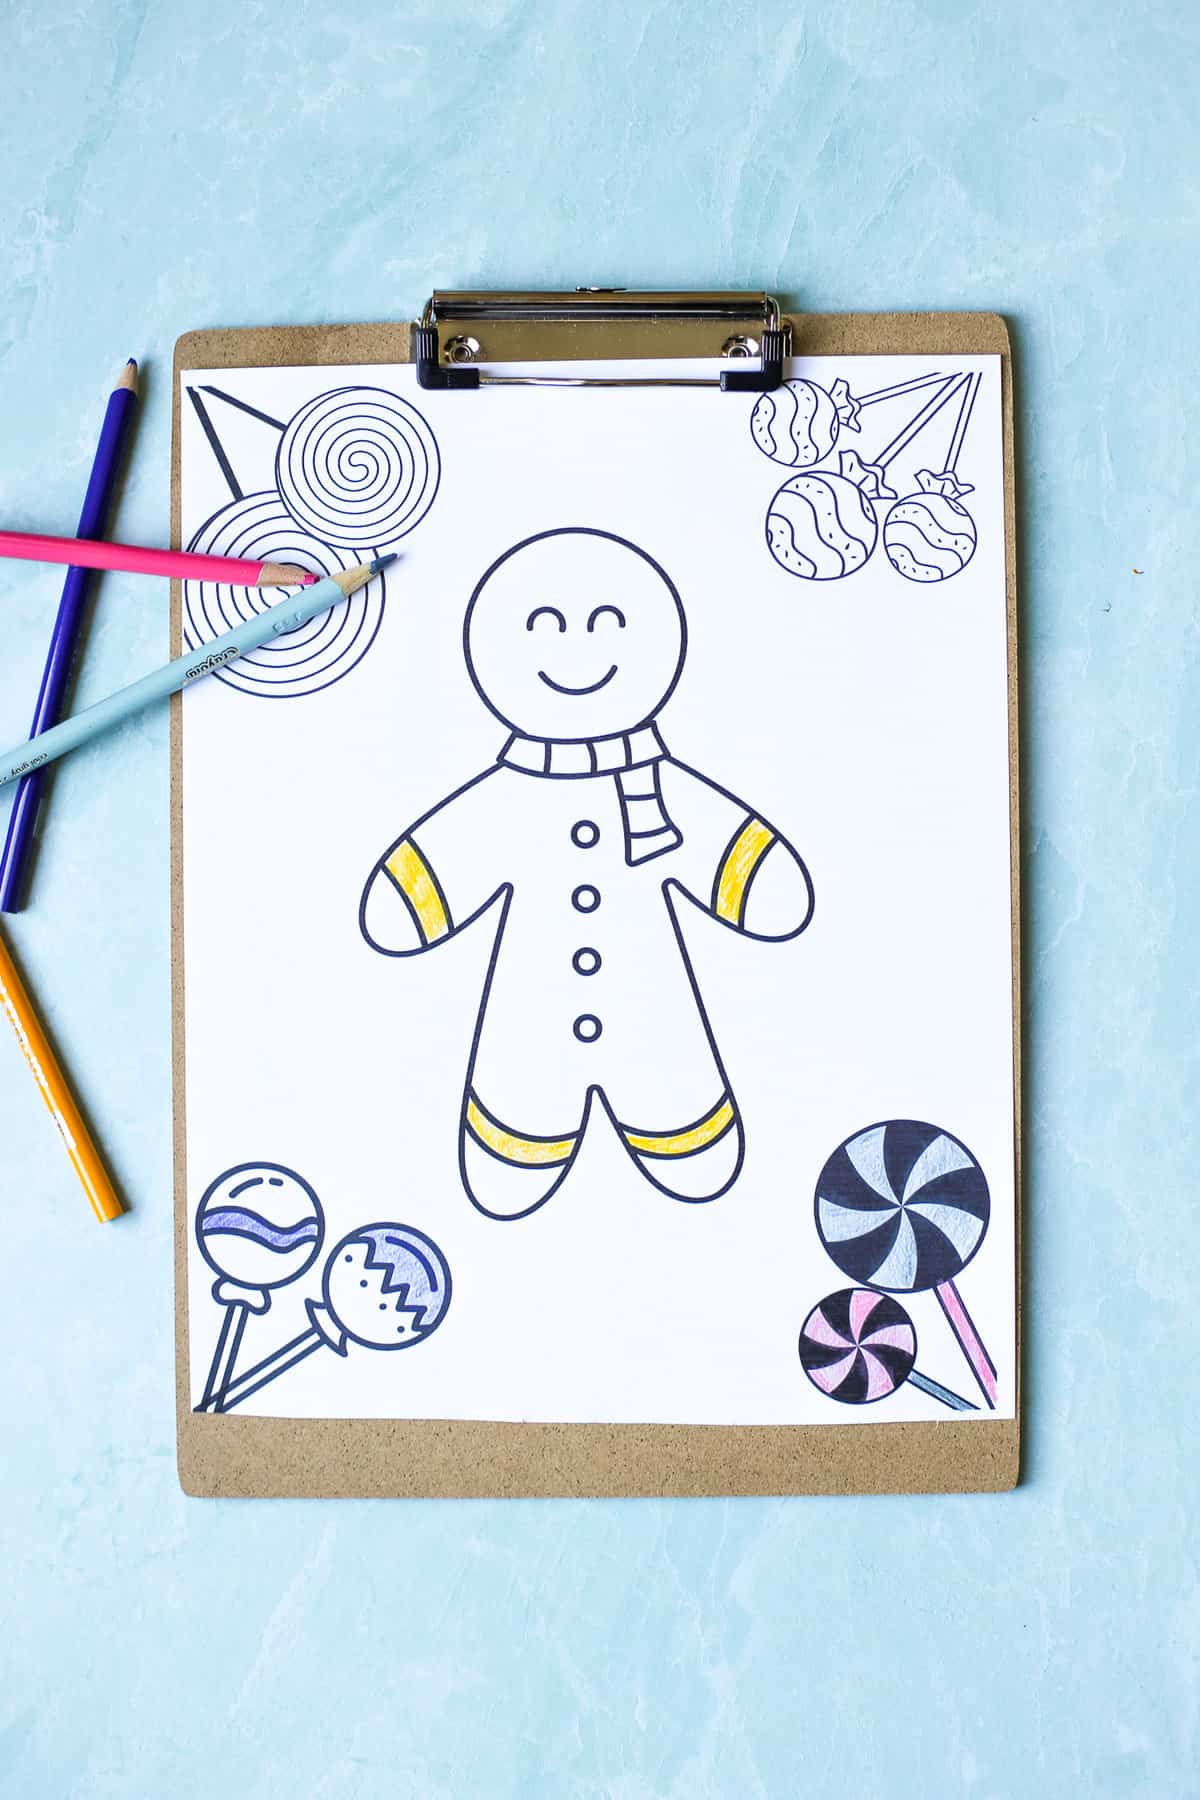 Gingerbread man coloring page on a clipboard with colored pencils around it.